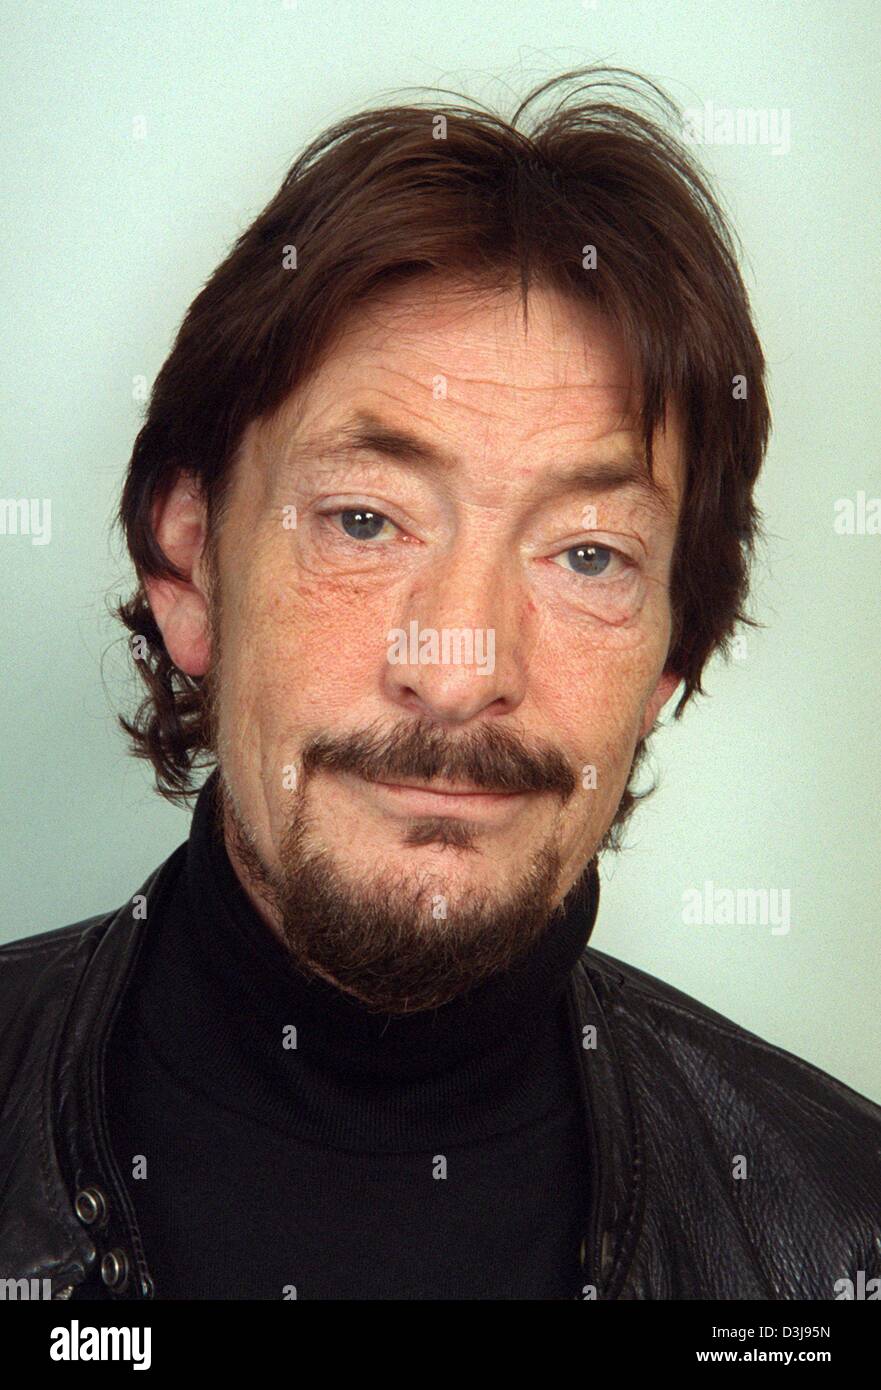 (dpa) - British rock and pop star Chris Rea in a picture taken in Cologne, Germany, 2 April 2004. The son of an Italian immigrant who was born in Middlesbrough, England, released his first single in 1978 and has sold over 22 million records worldwide. Stock Photo